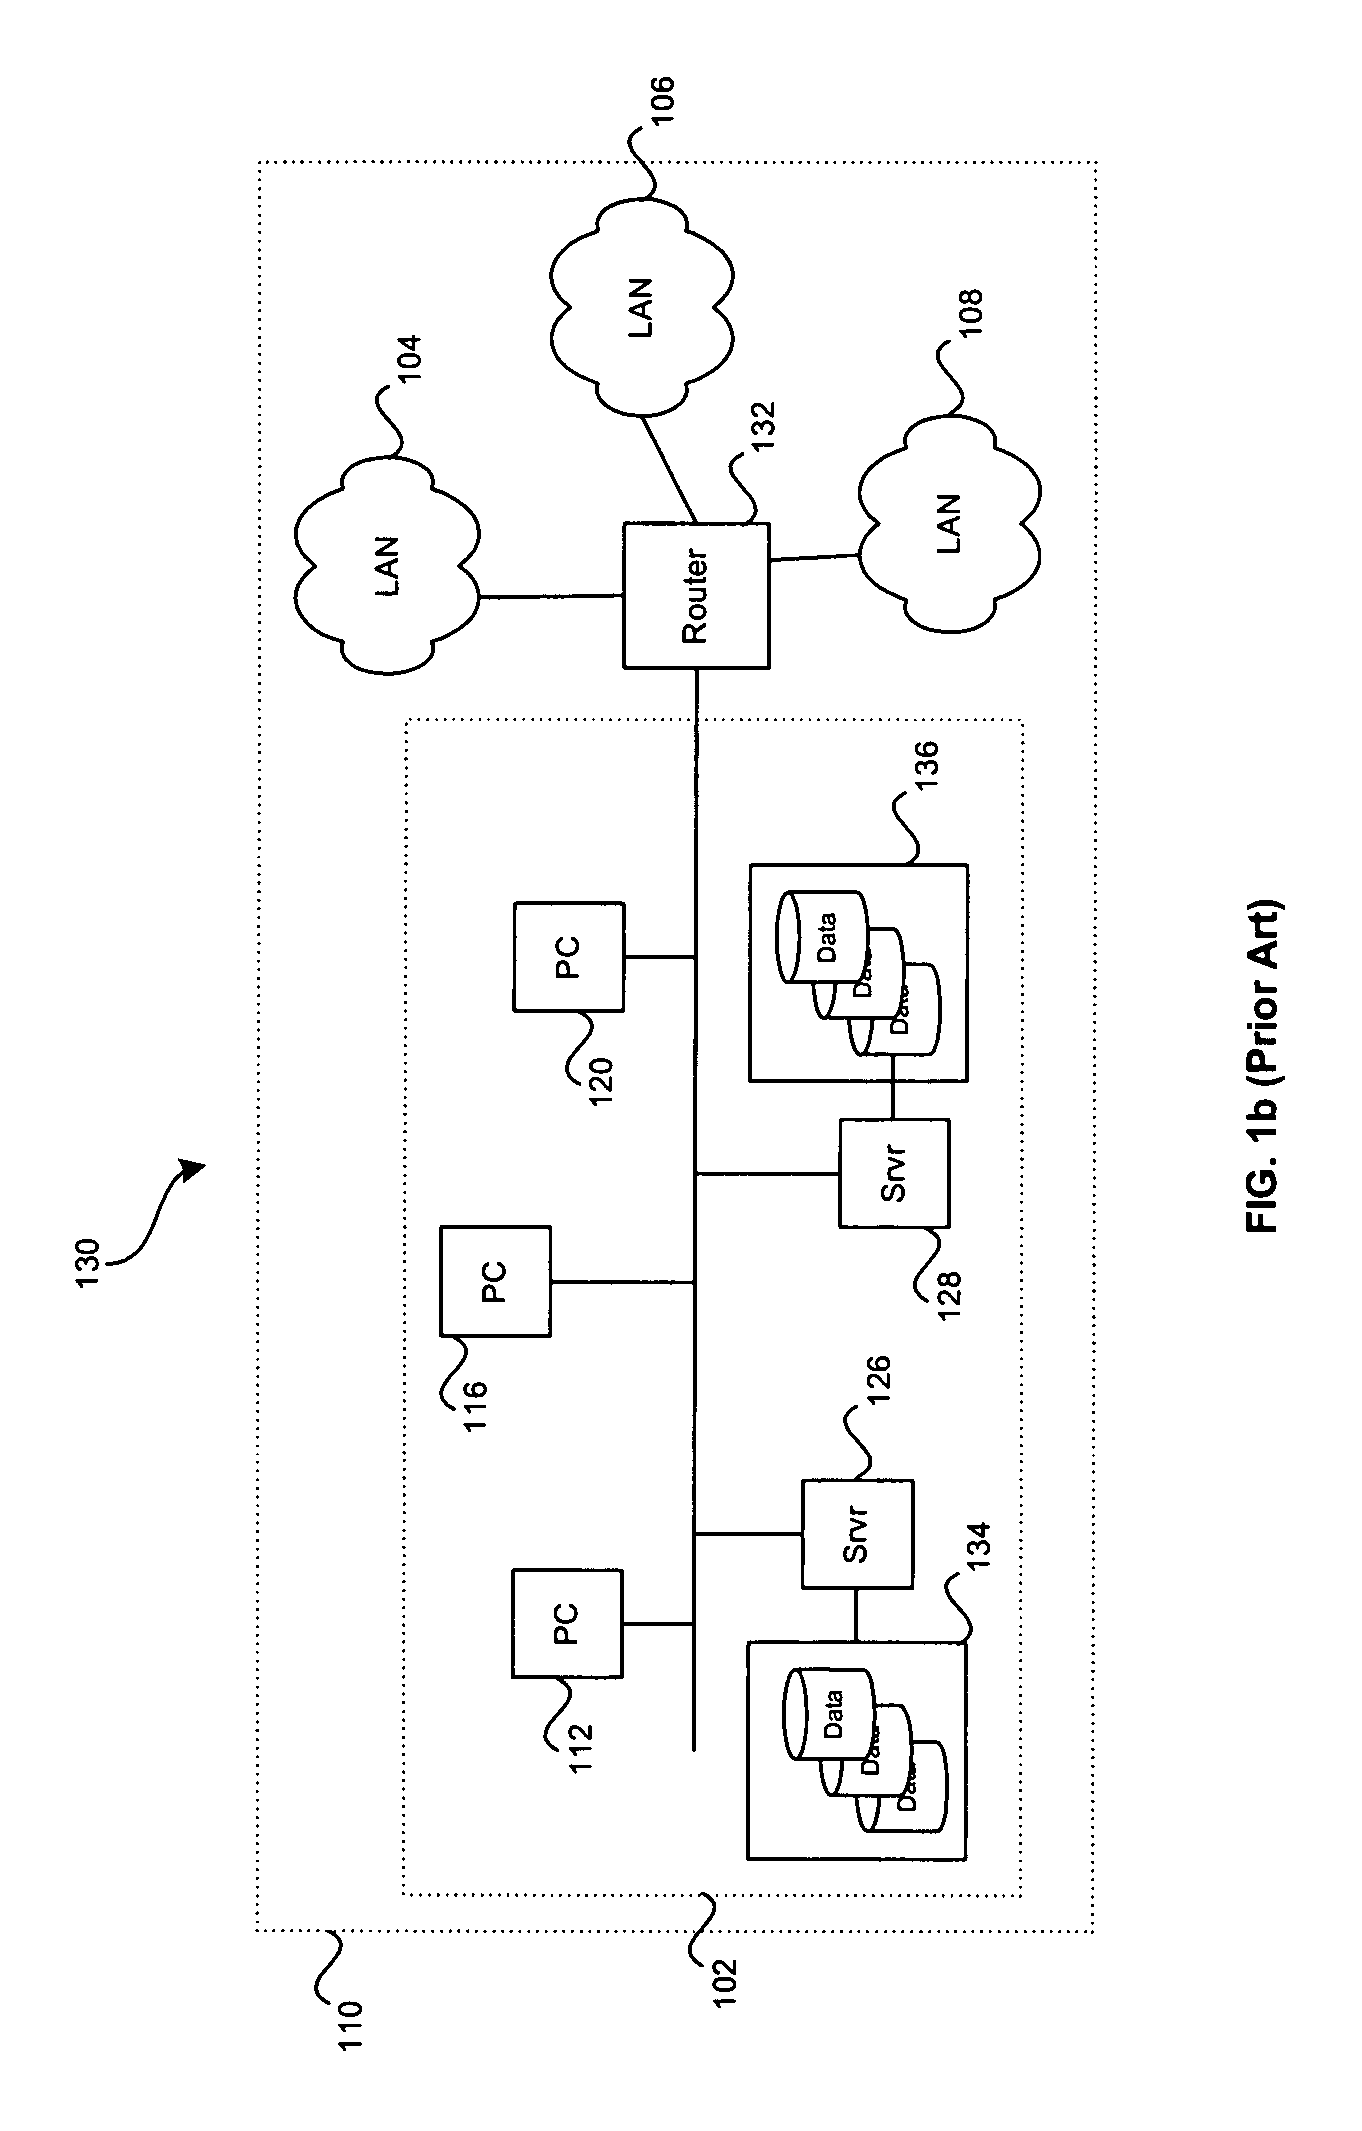 Method and system for onboard bit error rate (BER) estimation in a port bypass controller